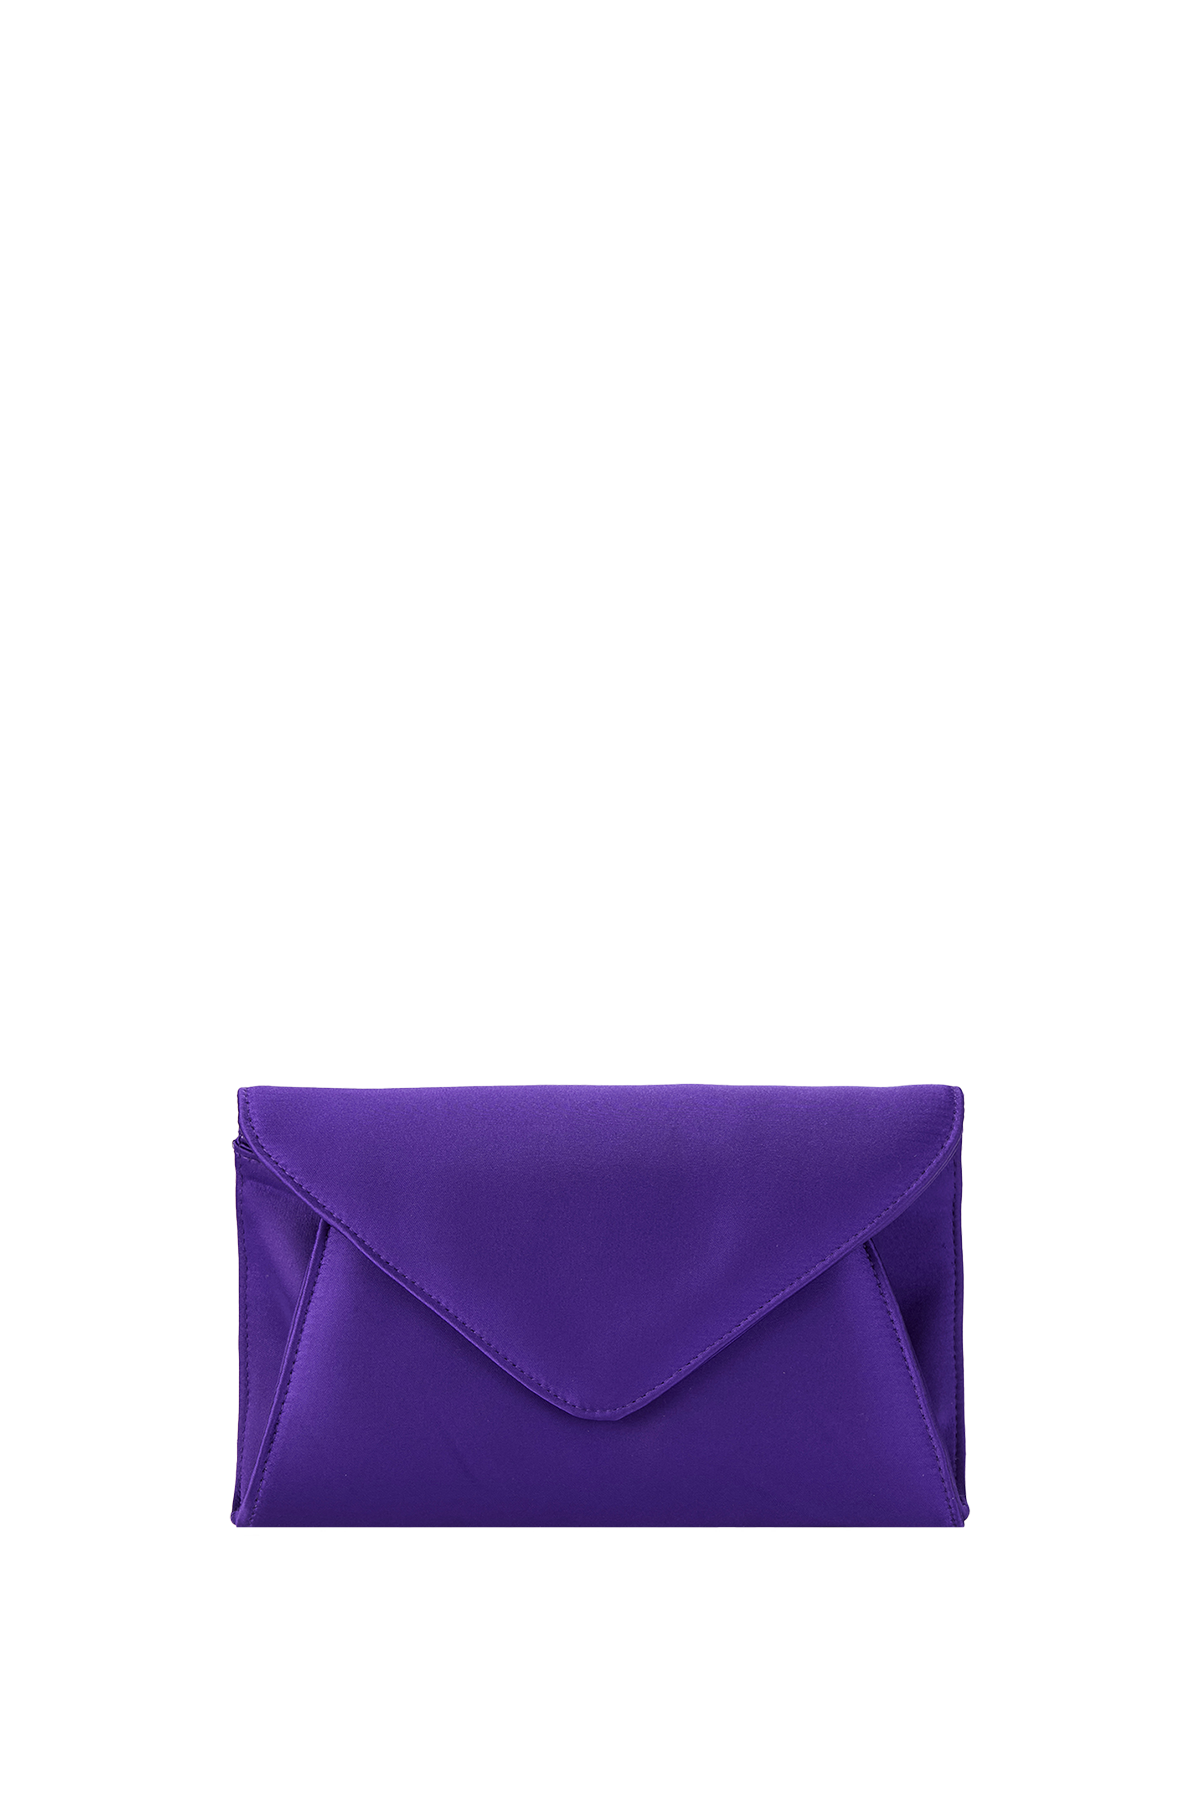 Recycled Satin Clutch Bag - Purple